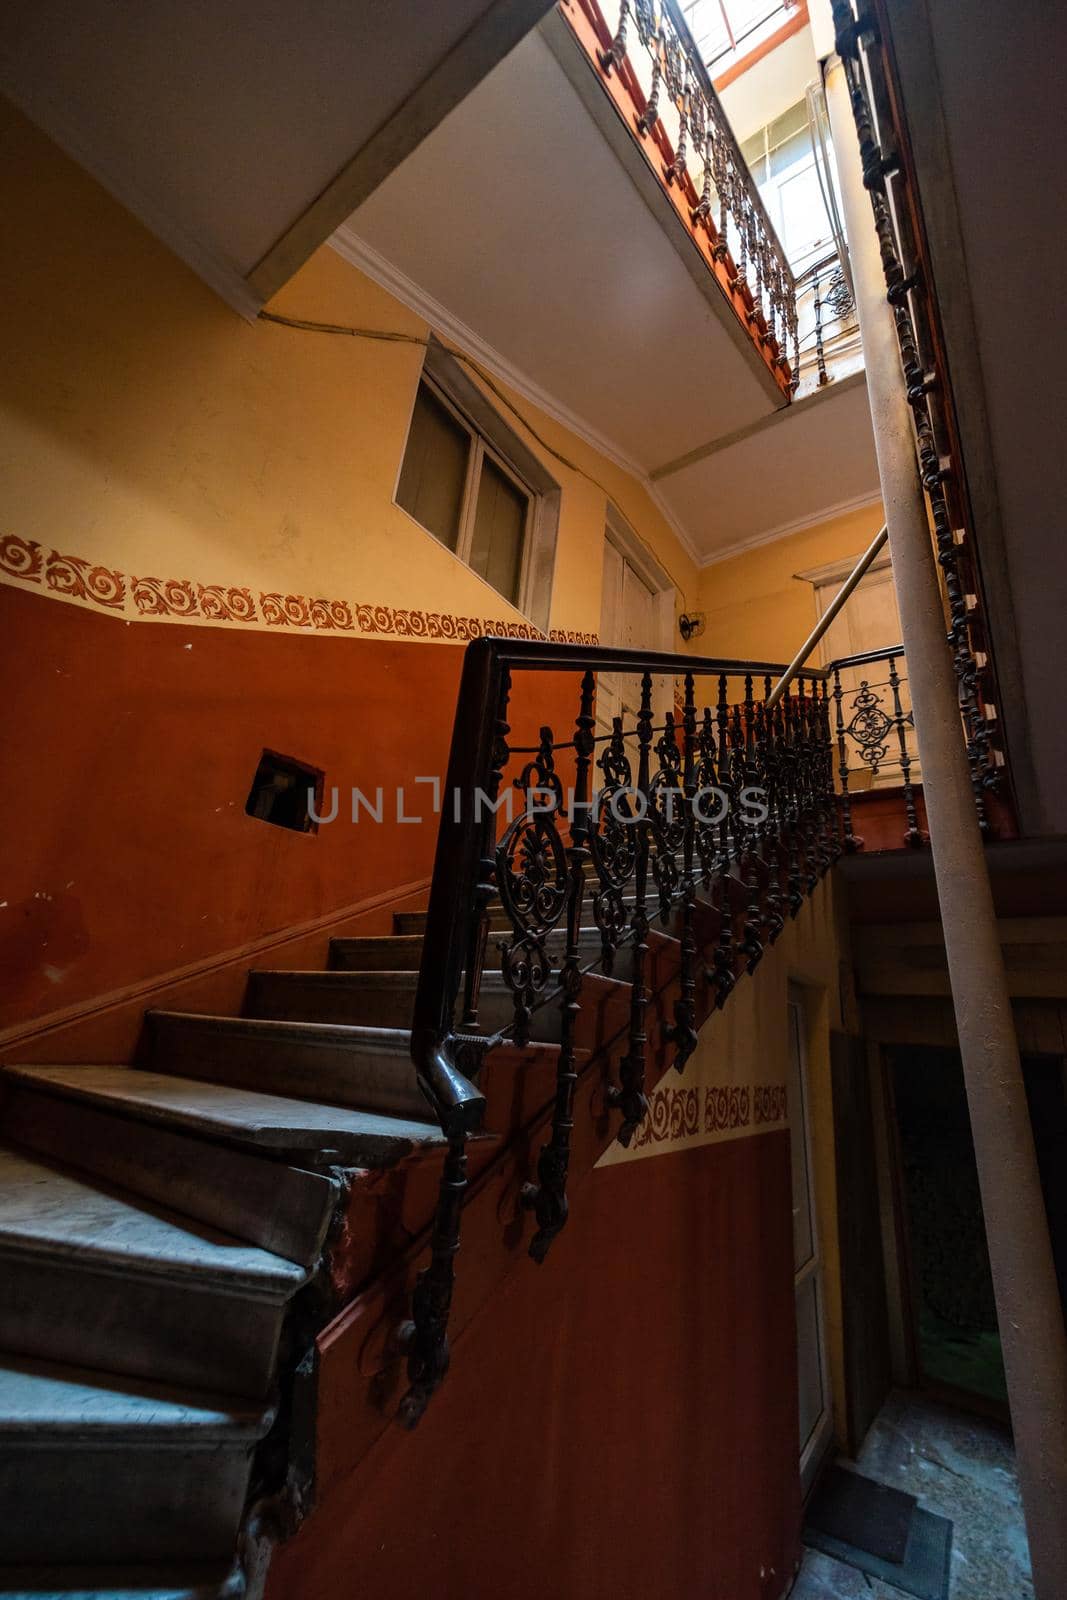 Old Tbilisi's maison stairways with spiral staircase decorated with carving metal holder